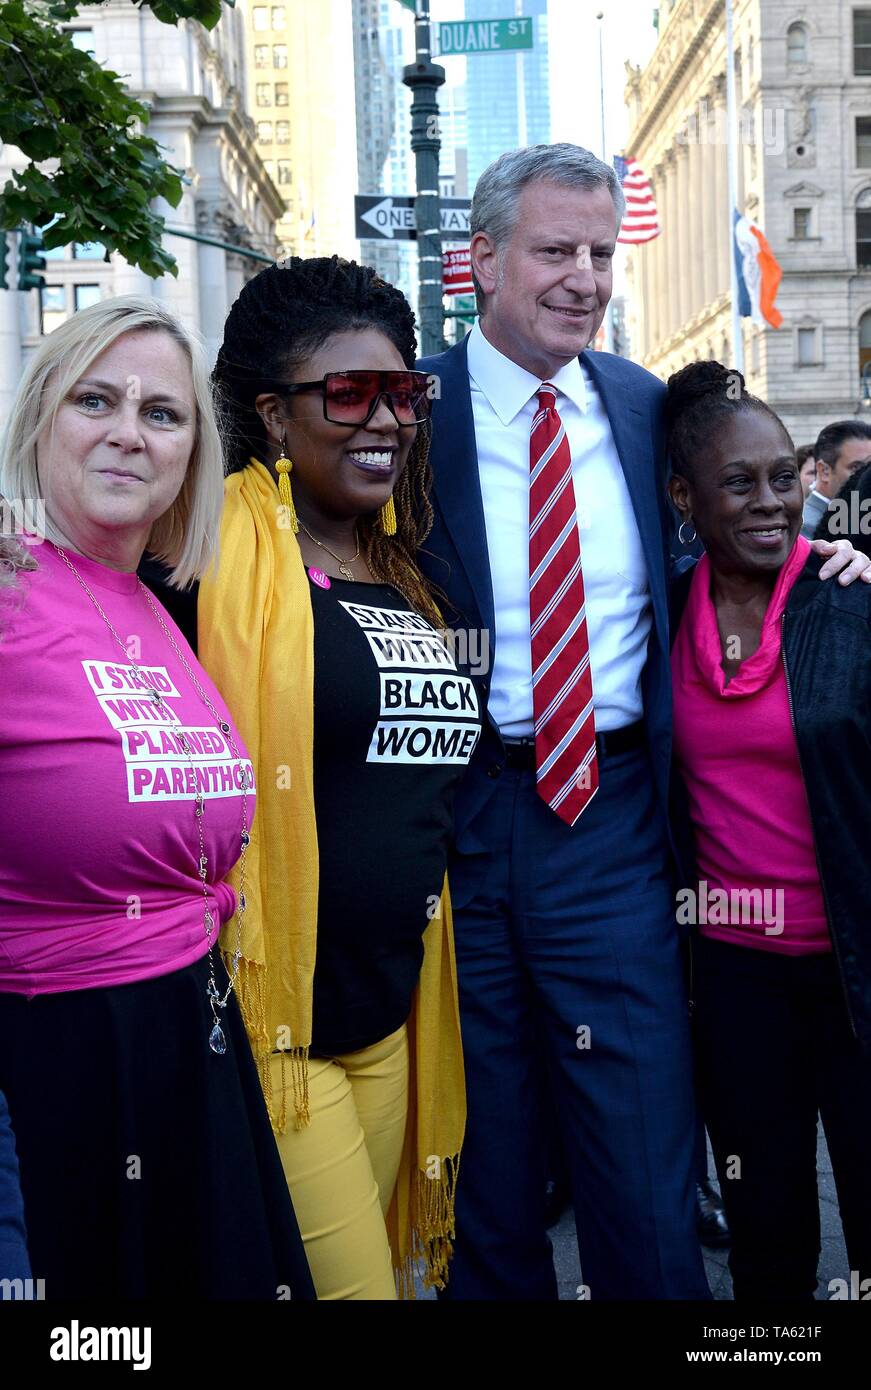 New York, NY, USA. 21st May, 2019. Laura McQuade, Bill De Blasio, Chirlane McCray in attendance for #STOPTHEBANS Planned Parenthood Rally, Foley Square, New York, NY May 21, 2019. Credit: Kristin Callahan/Everett Collection/Alamy Live News Stock Photo